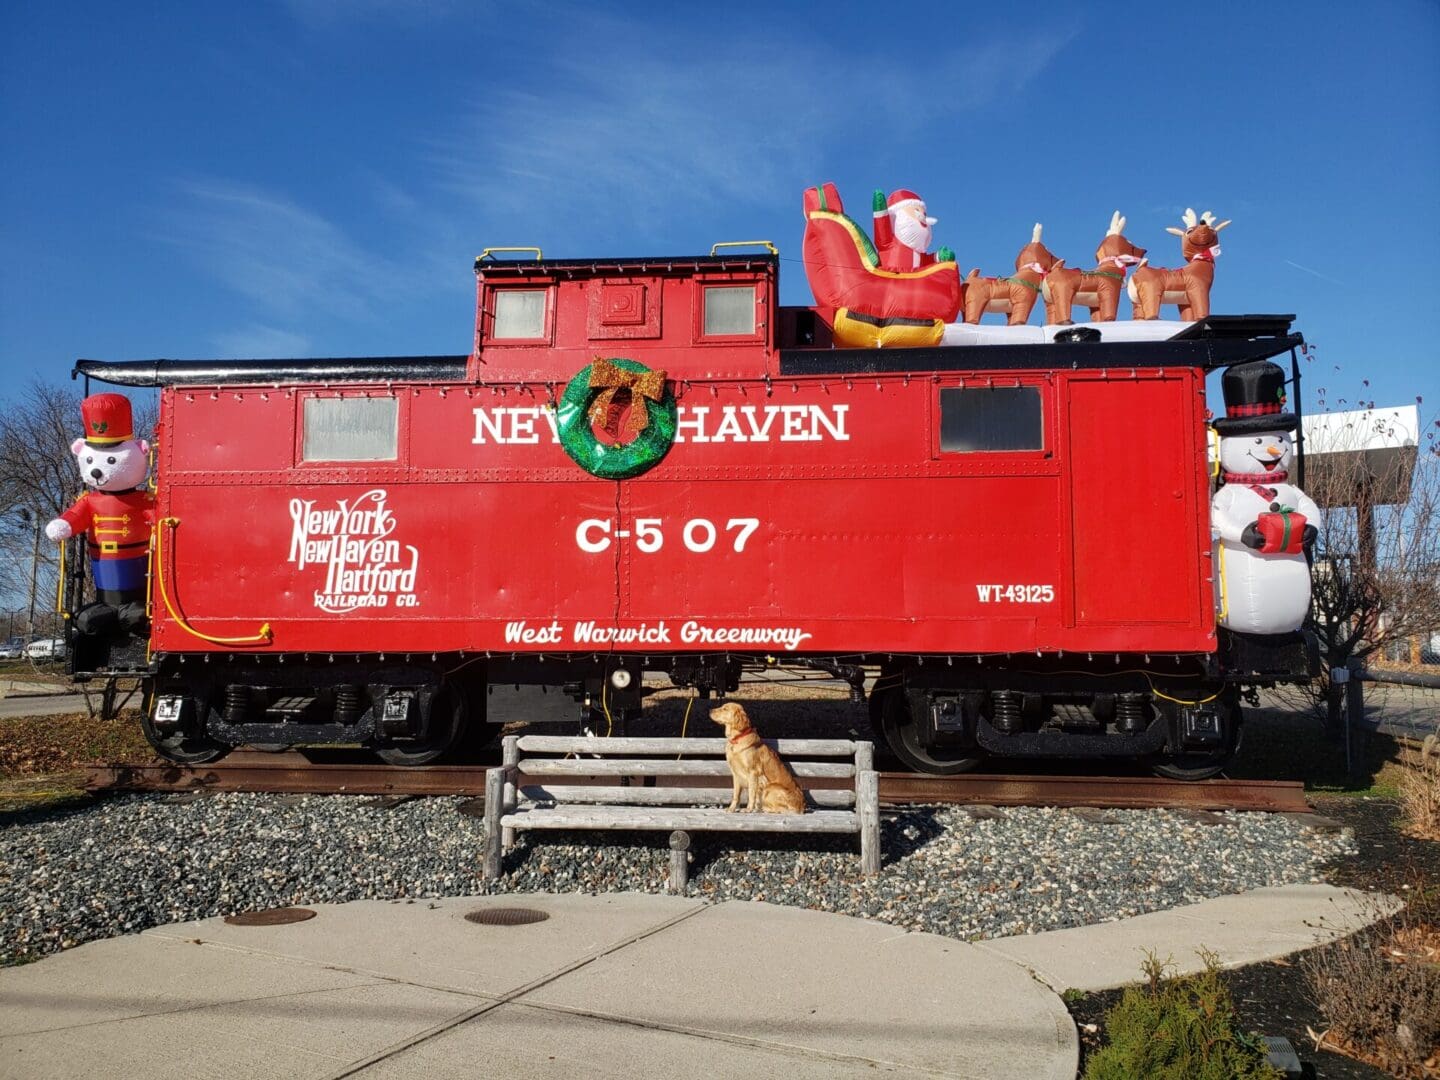 A red caboose with santa claus on it.